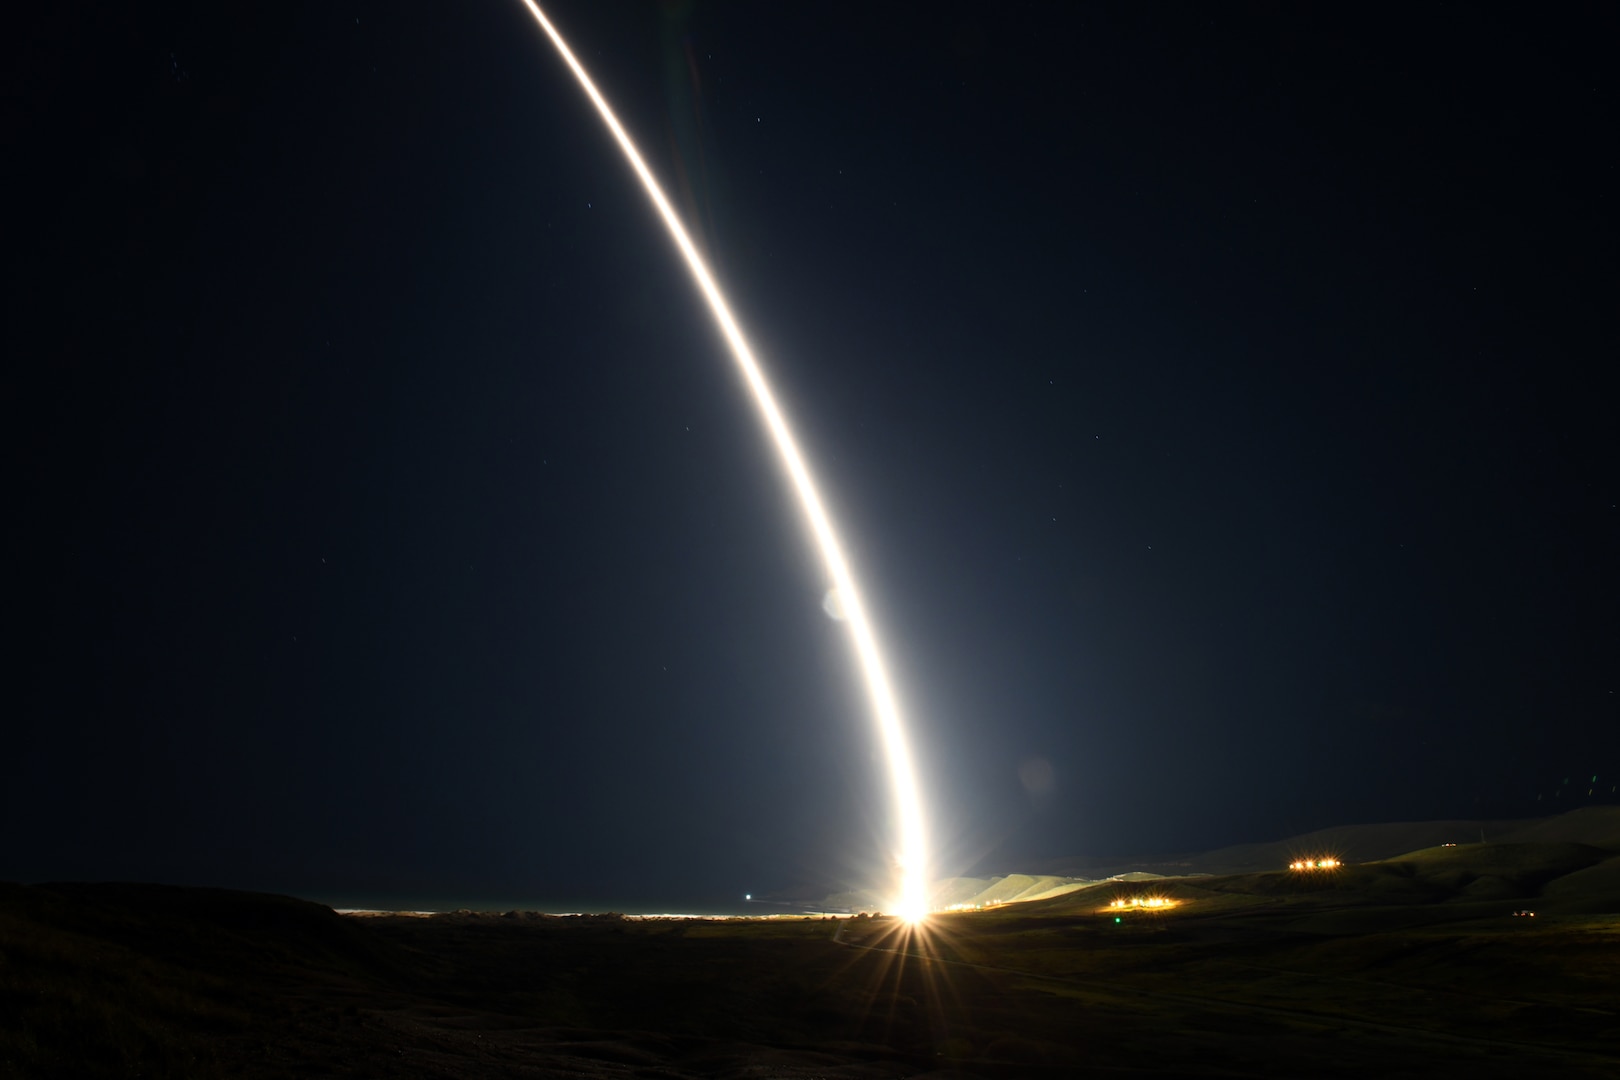 A missile launches in  a dark sky.